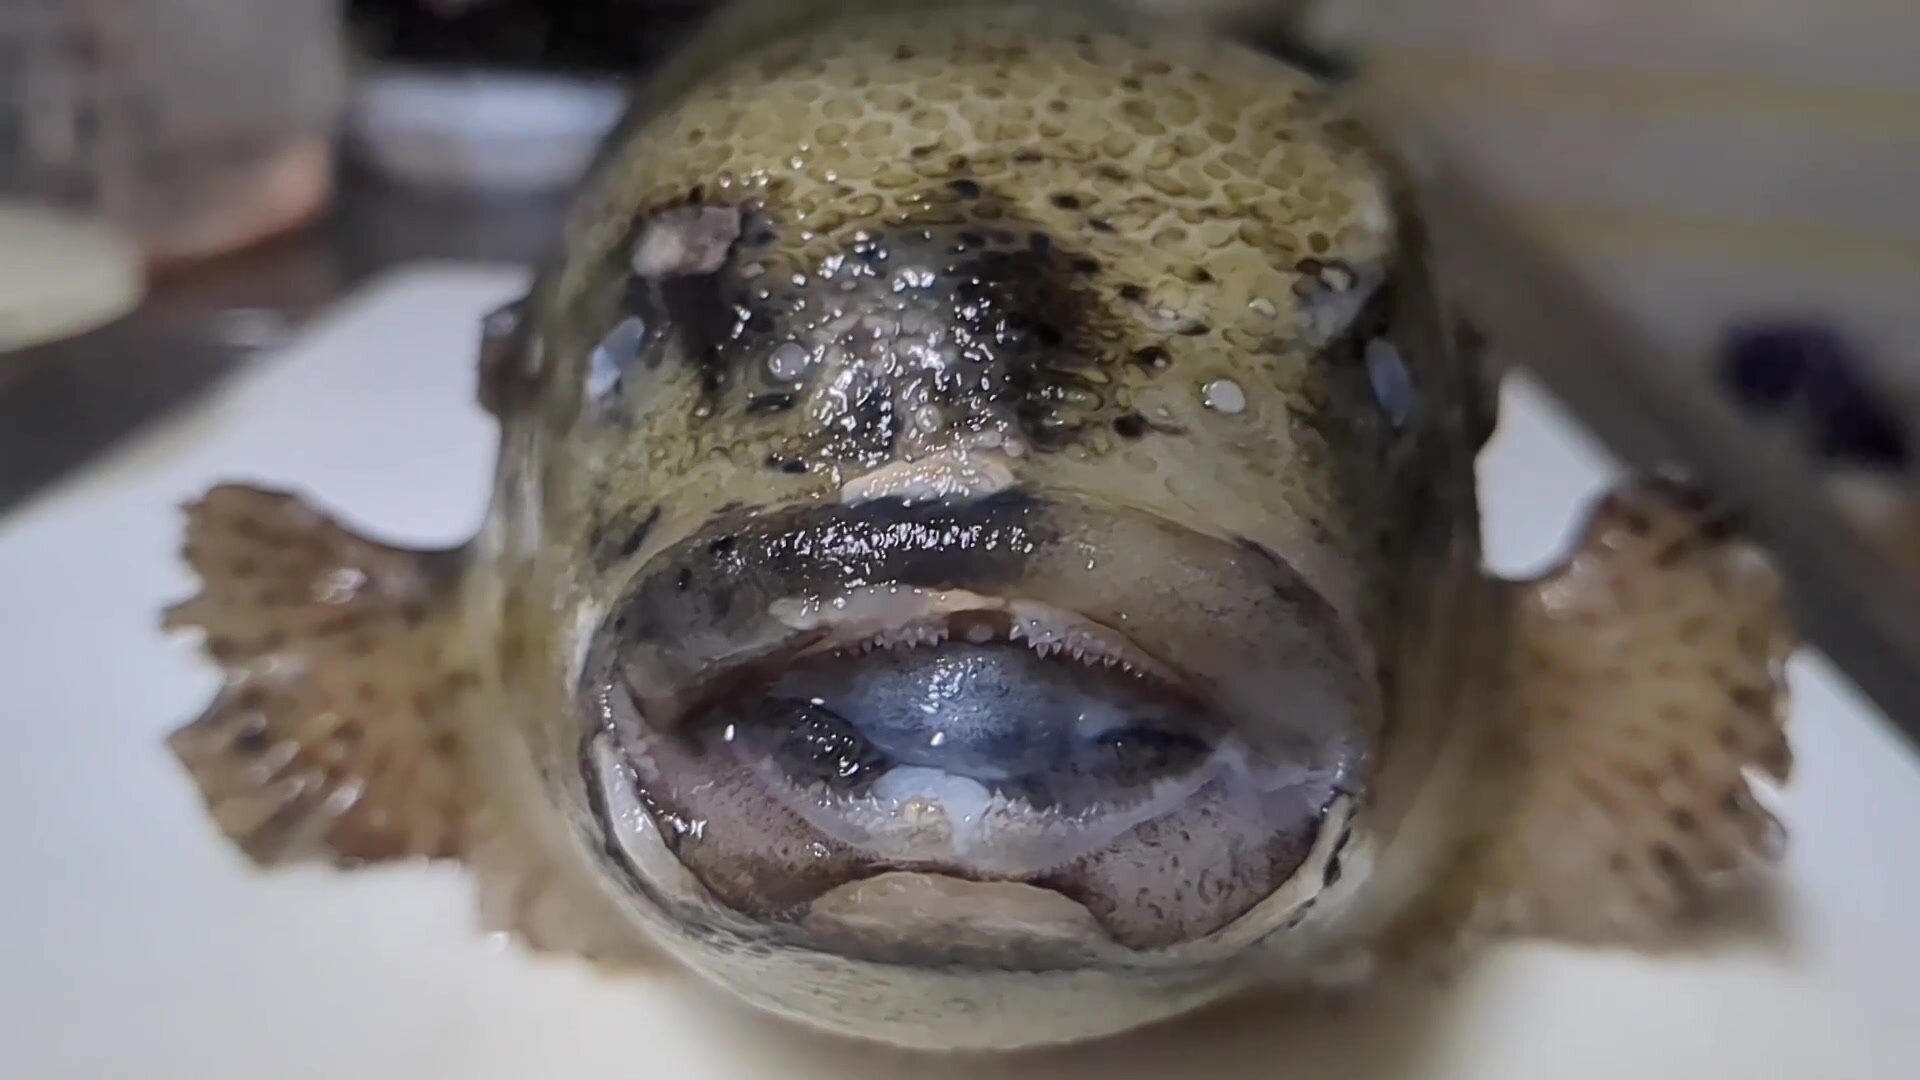 I ate a grotesque fish and pooped out